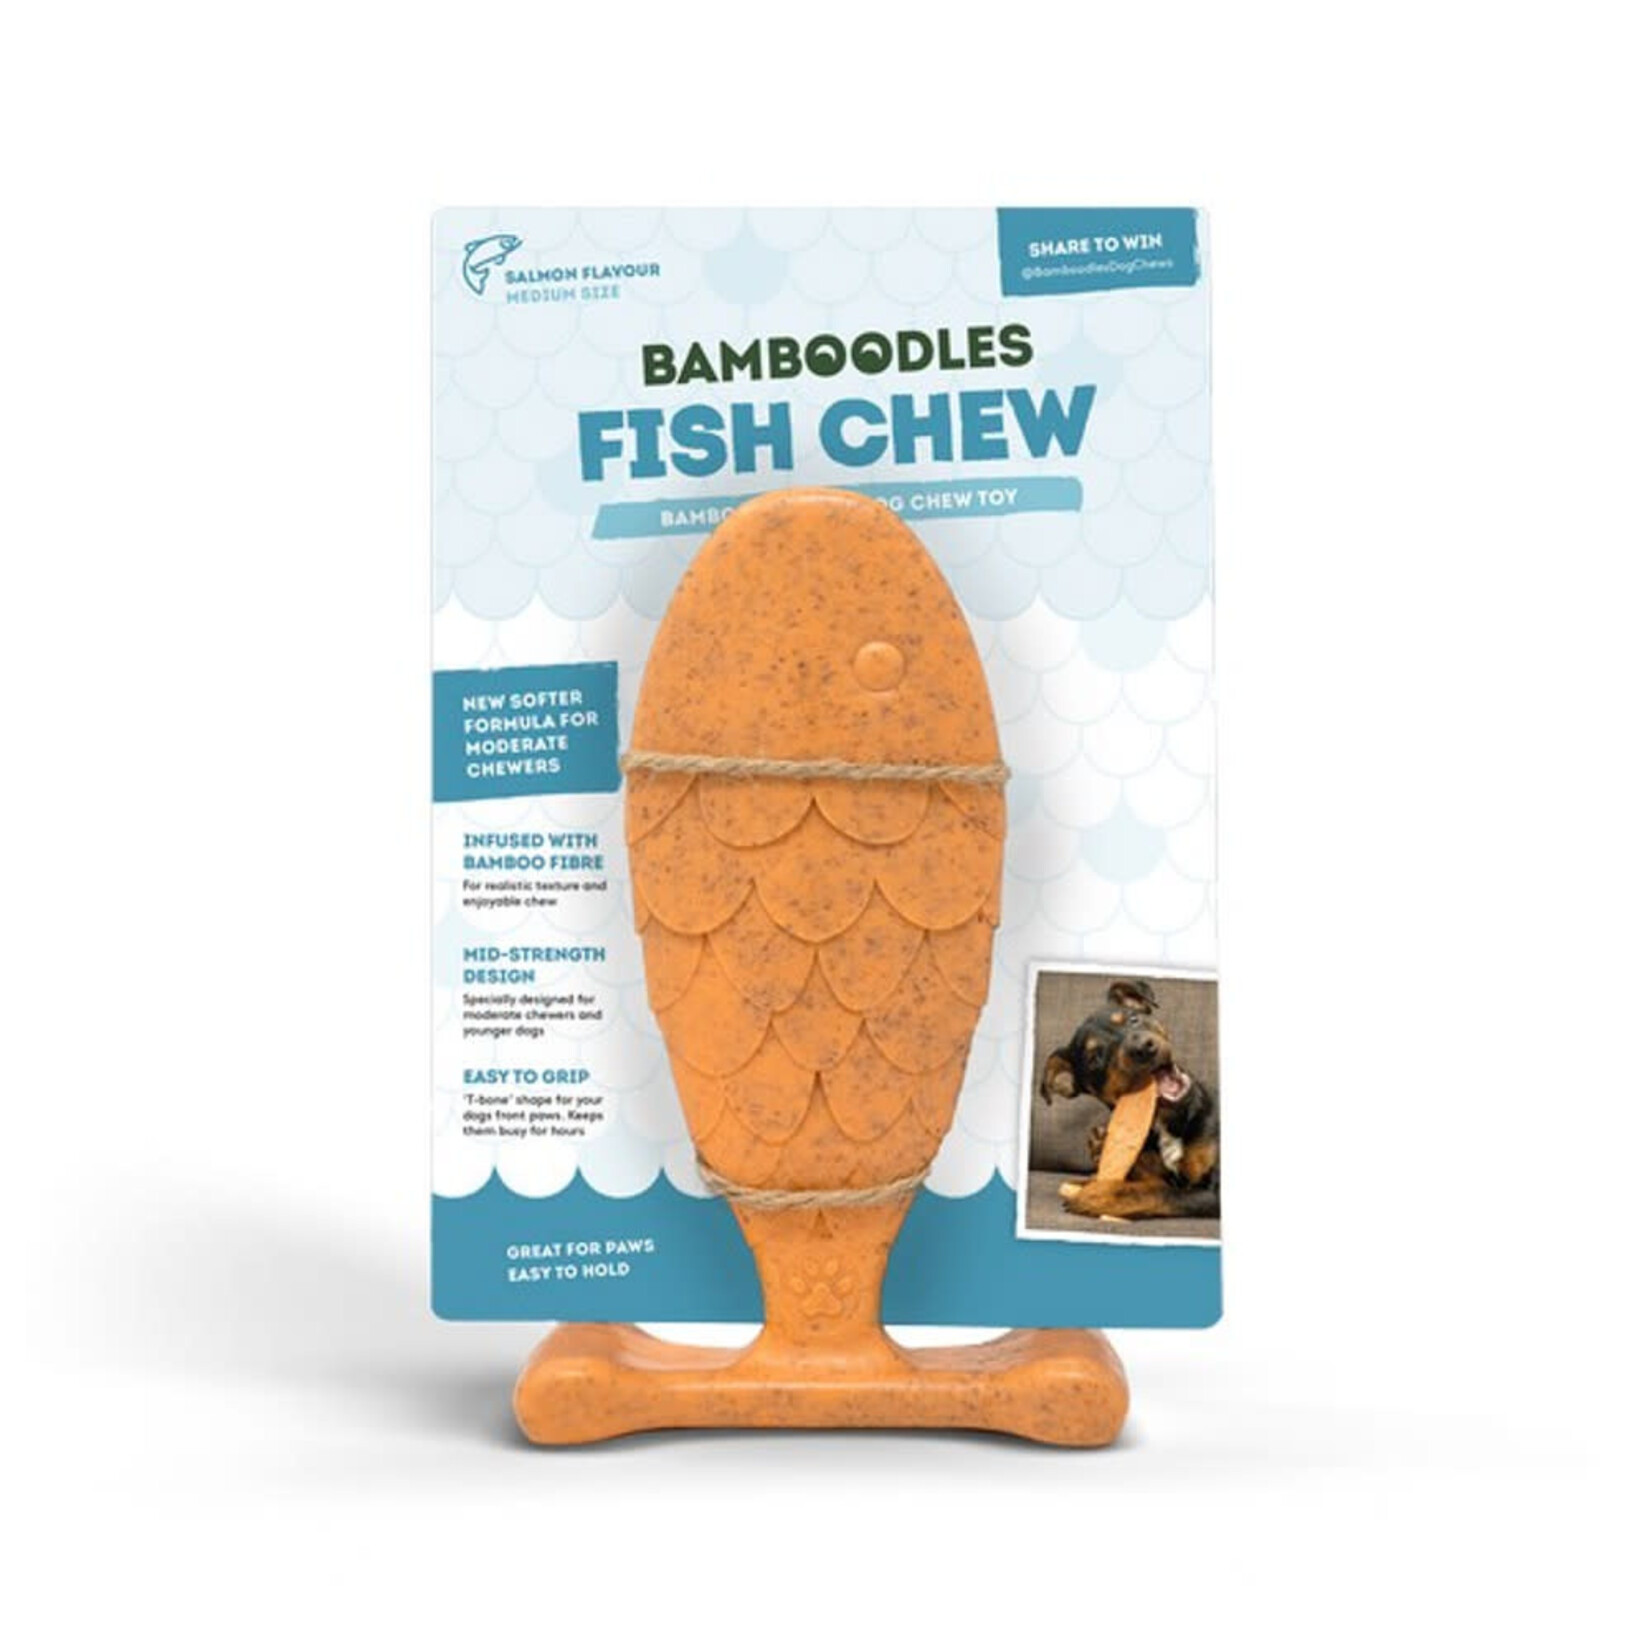 Bamboodles Fish Chew Bamboo Infused Salmon Flavoured Dog Chew